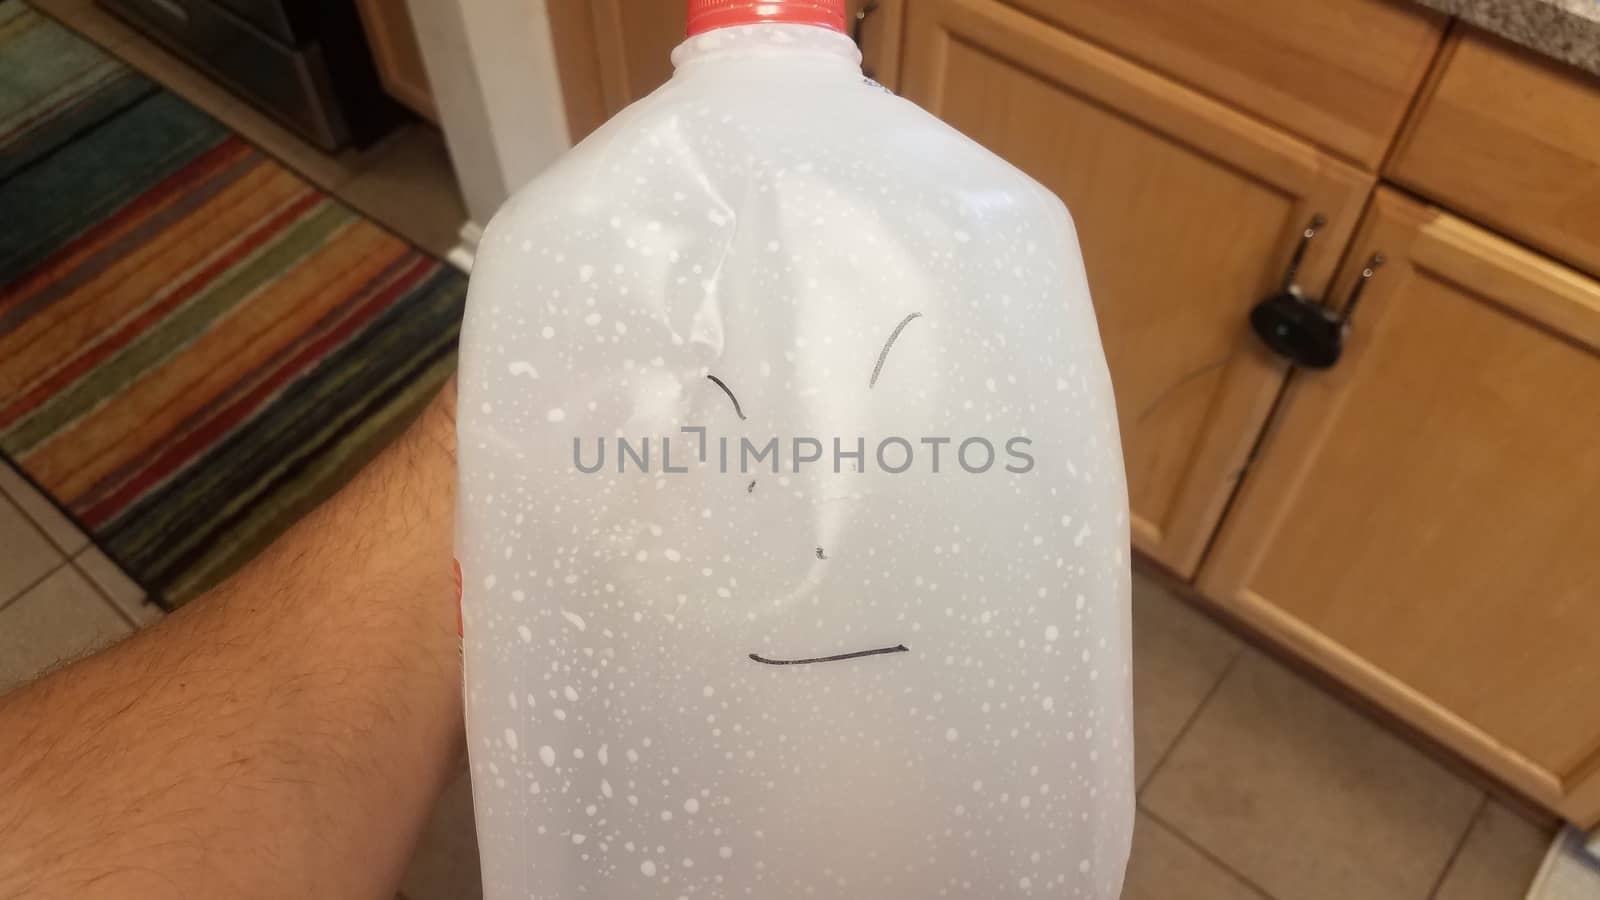 angry face drawn on empty milk gallon jug in kitchen